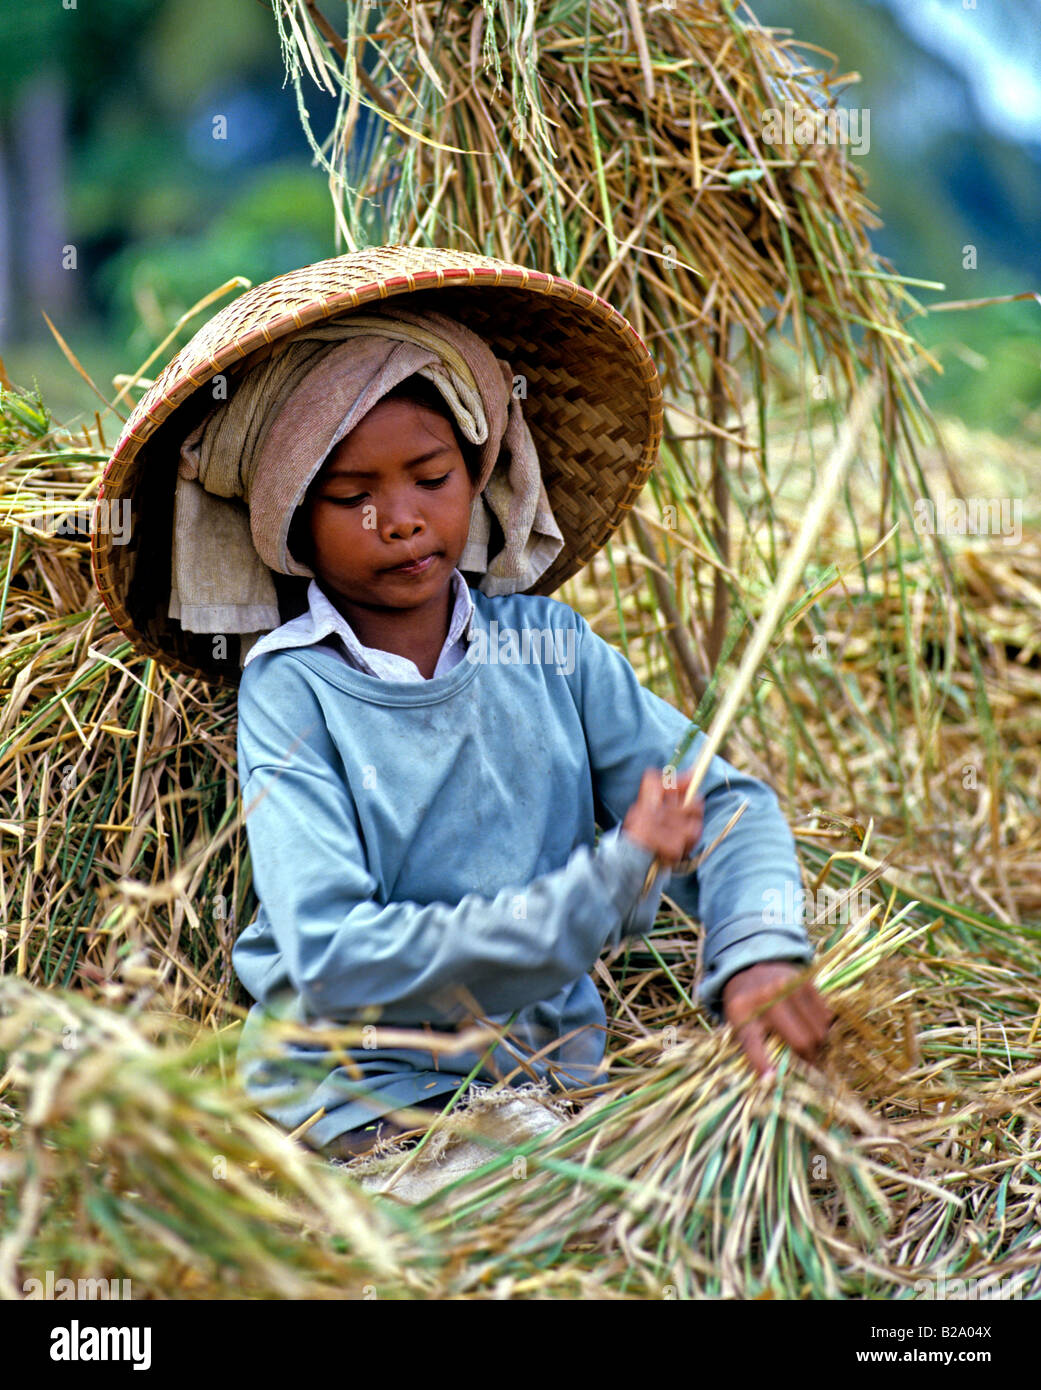 Rice harvest Bali Indonesia Date 28 03 2008 Ref WP B548 111653 0057 COMPULSORY CREDIT World Pictures Photoshot Stock Photo